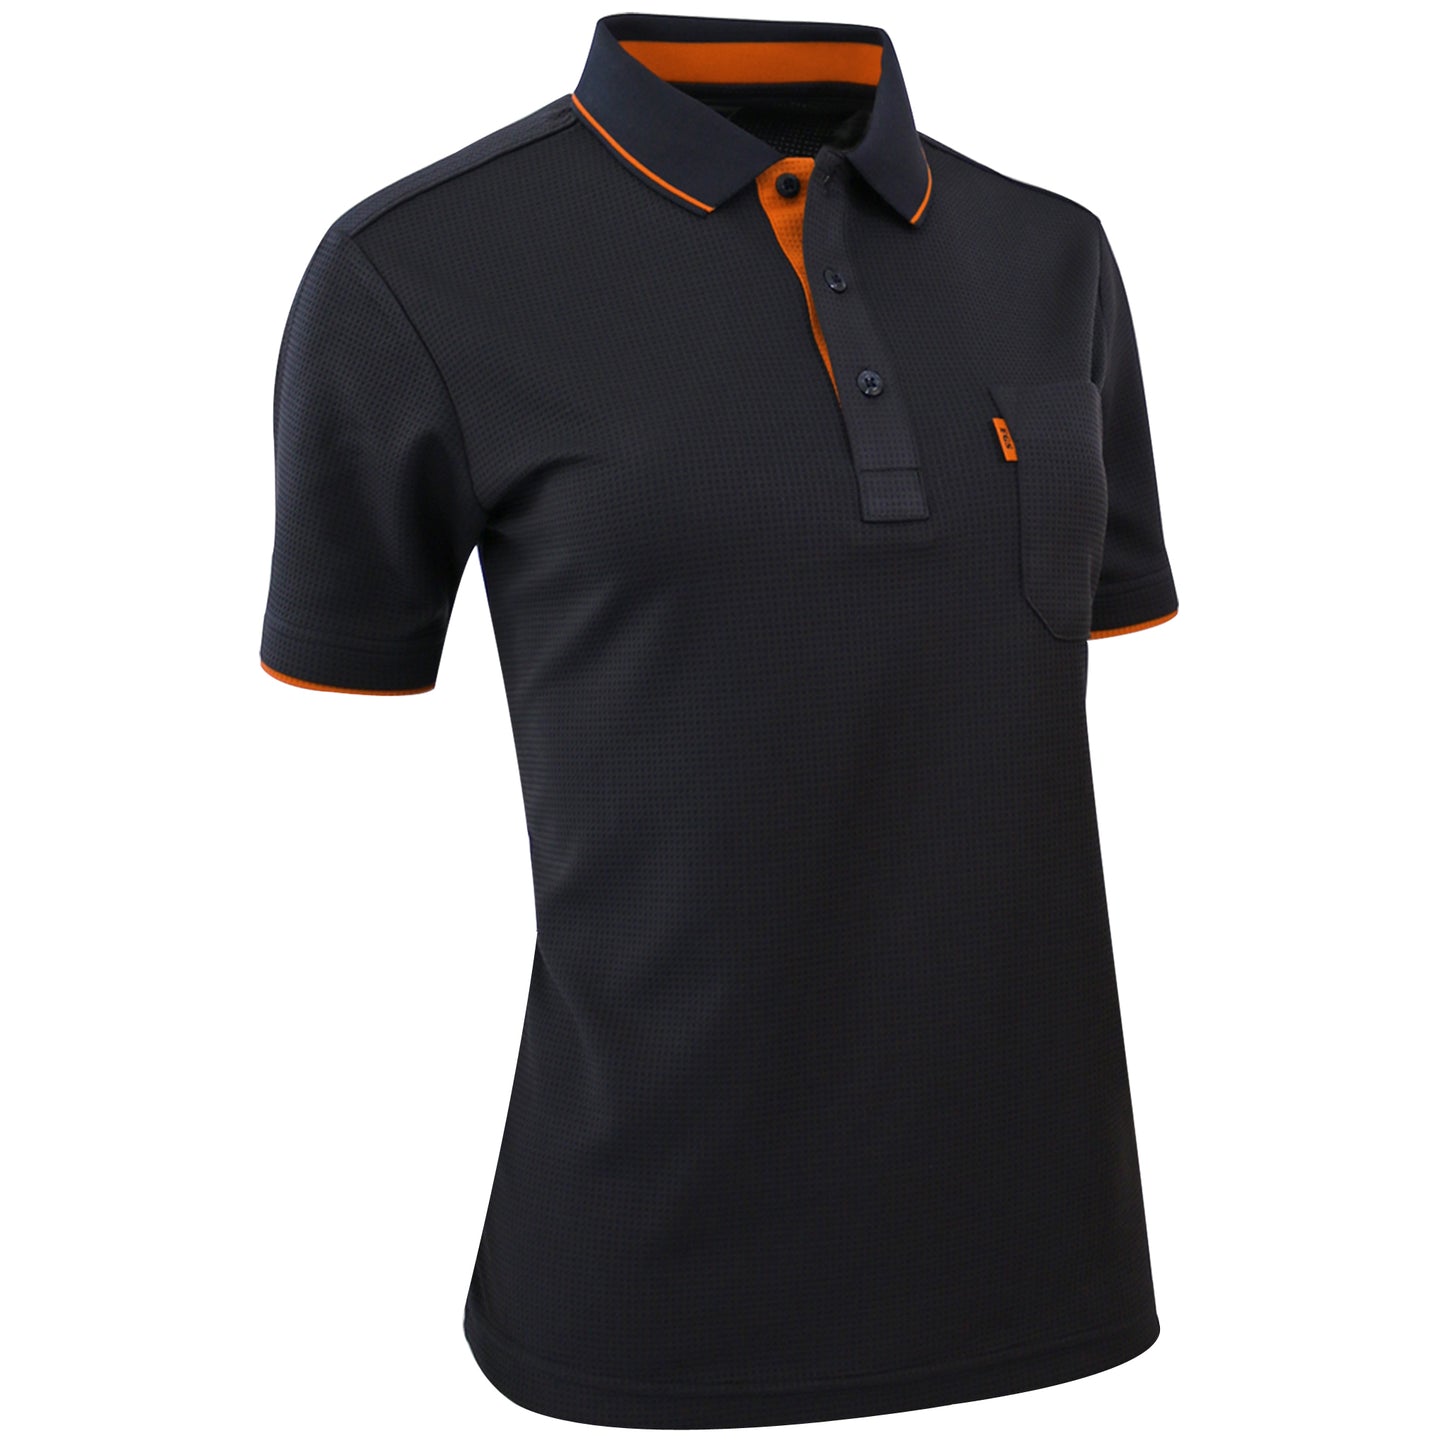 Coolon Tech Dri Cool Collared Lined Polo Shirt(6colors)